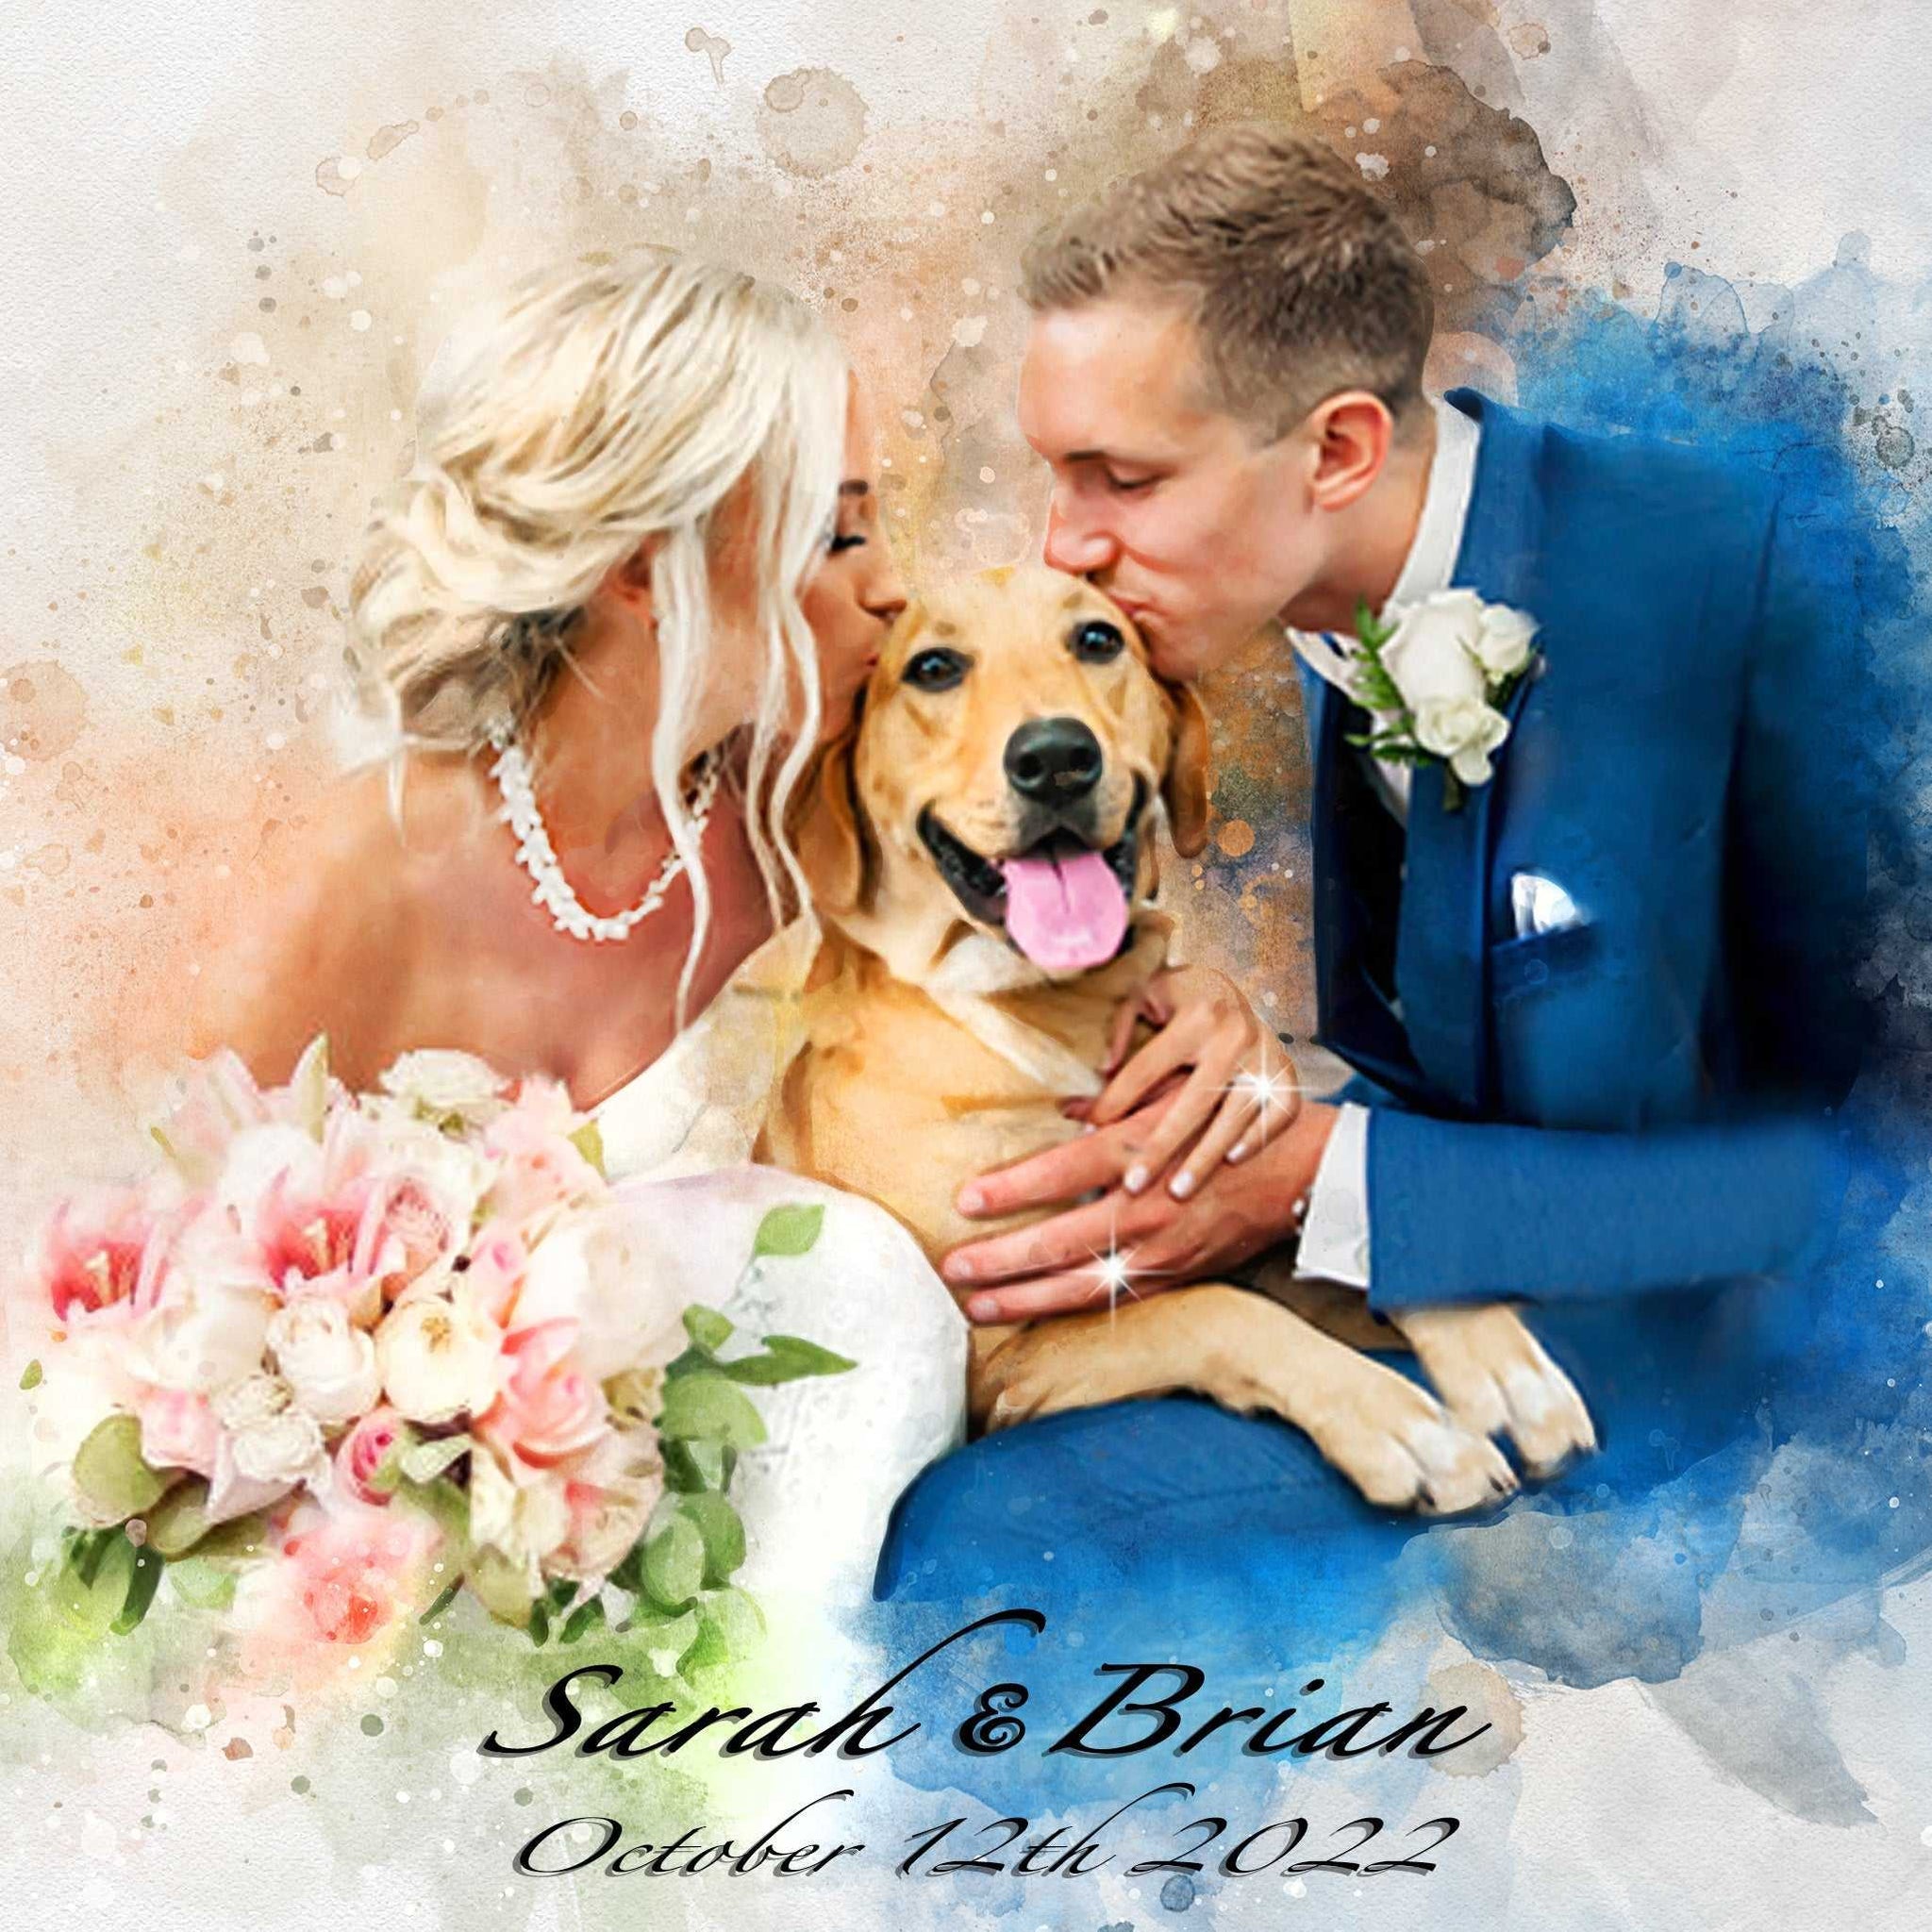 Personalized Couple Paintings | Turn Photo into Painting | Custom Painting from Photo - FromPicToArt